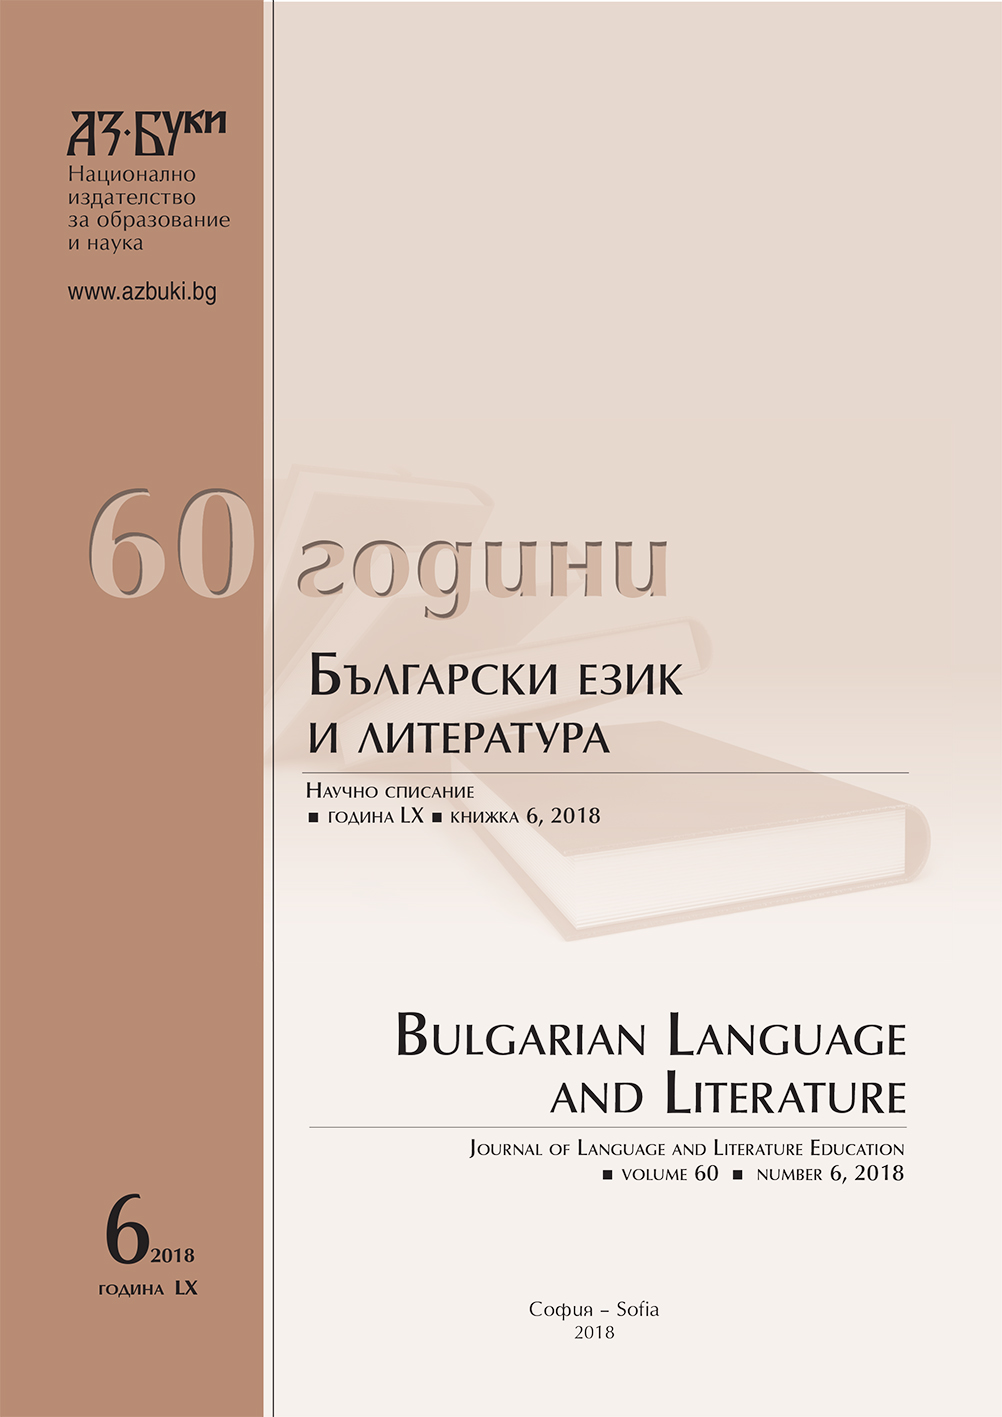 The Own – Foreing Problem аnd the Model of the Bulgarian Literary Language During the Revival Cover Image